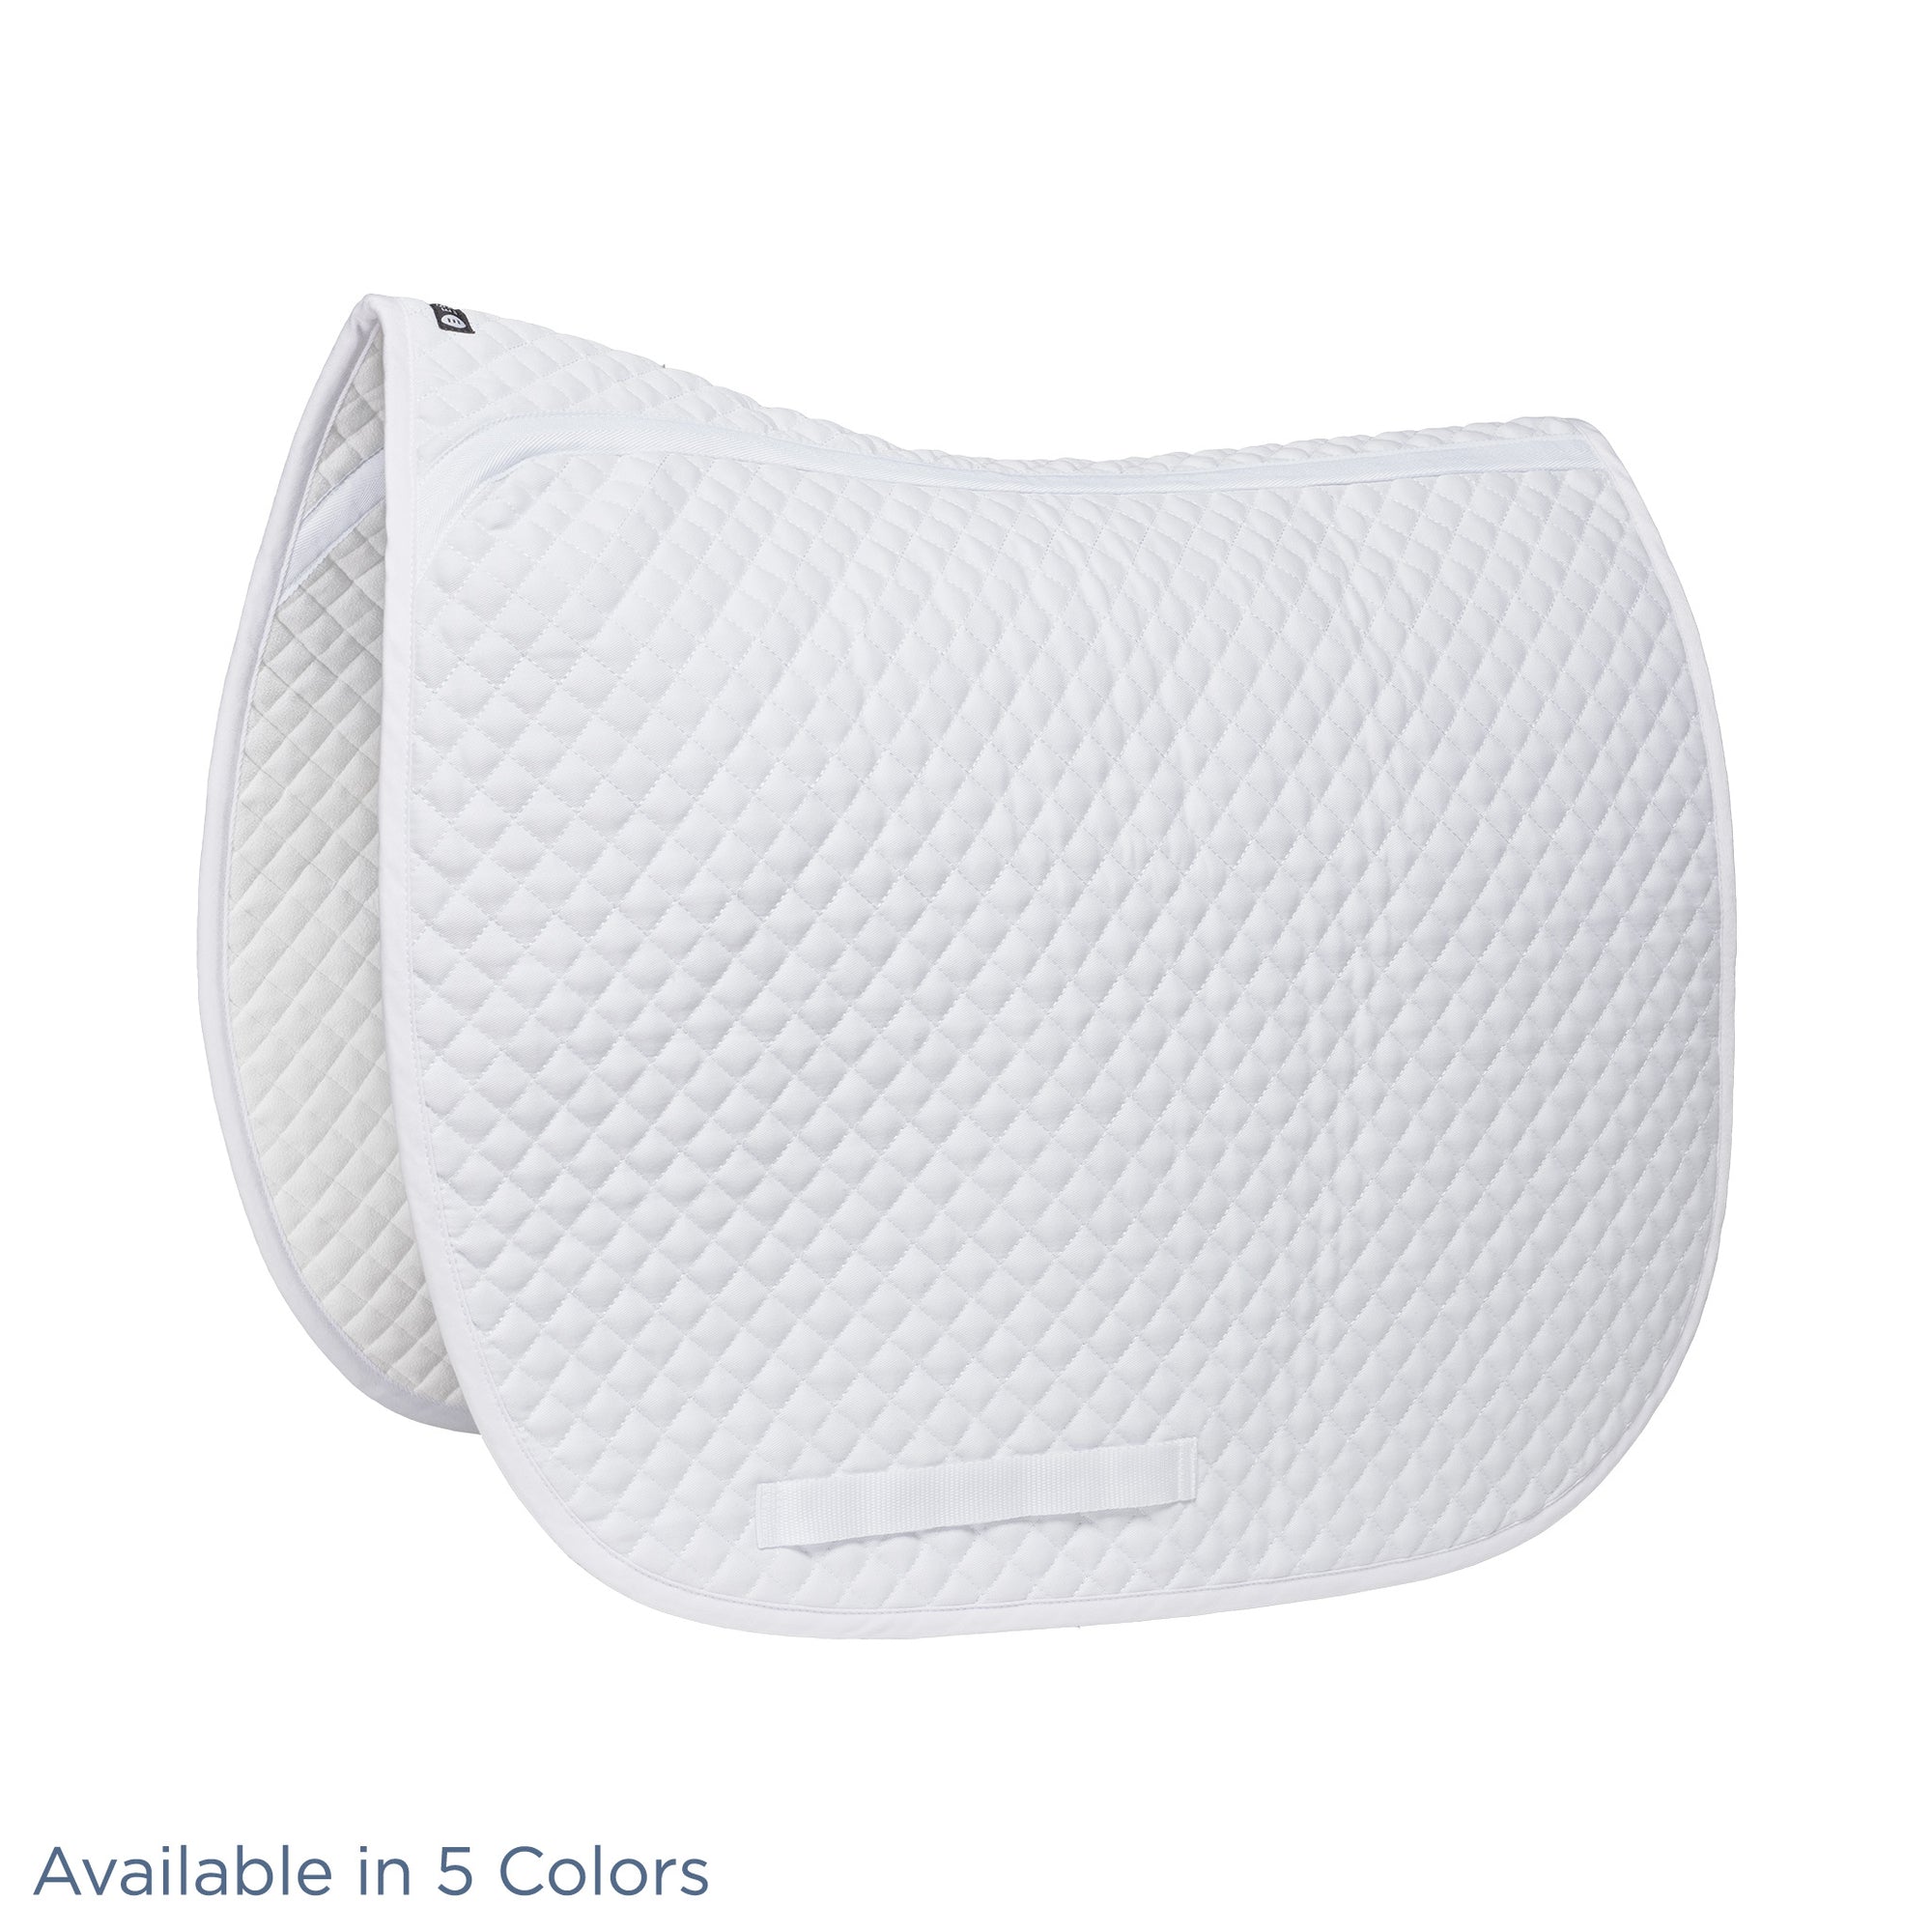 Essential Dressage Square Pad Available in 5 Colors